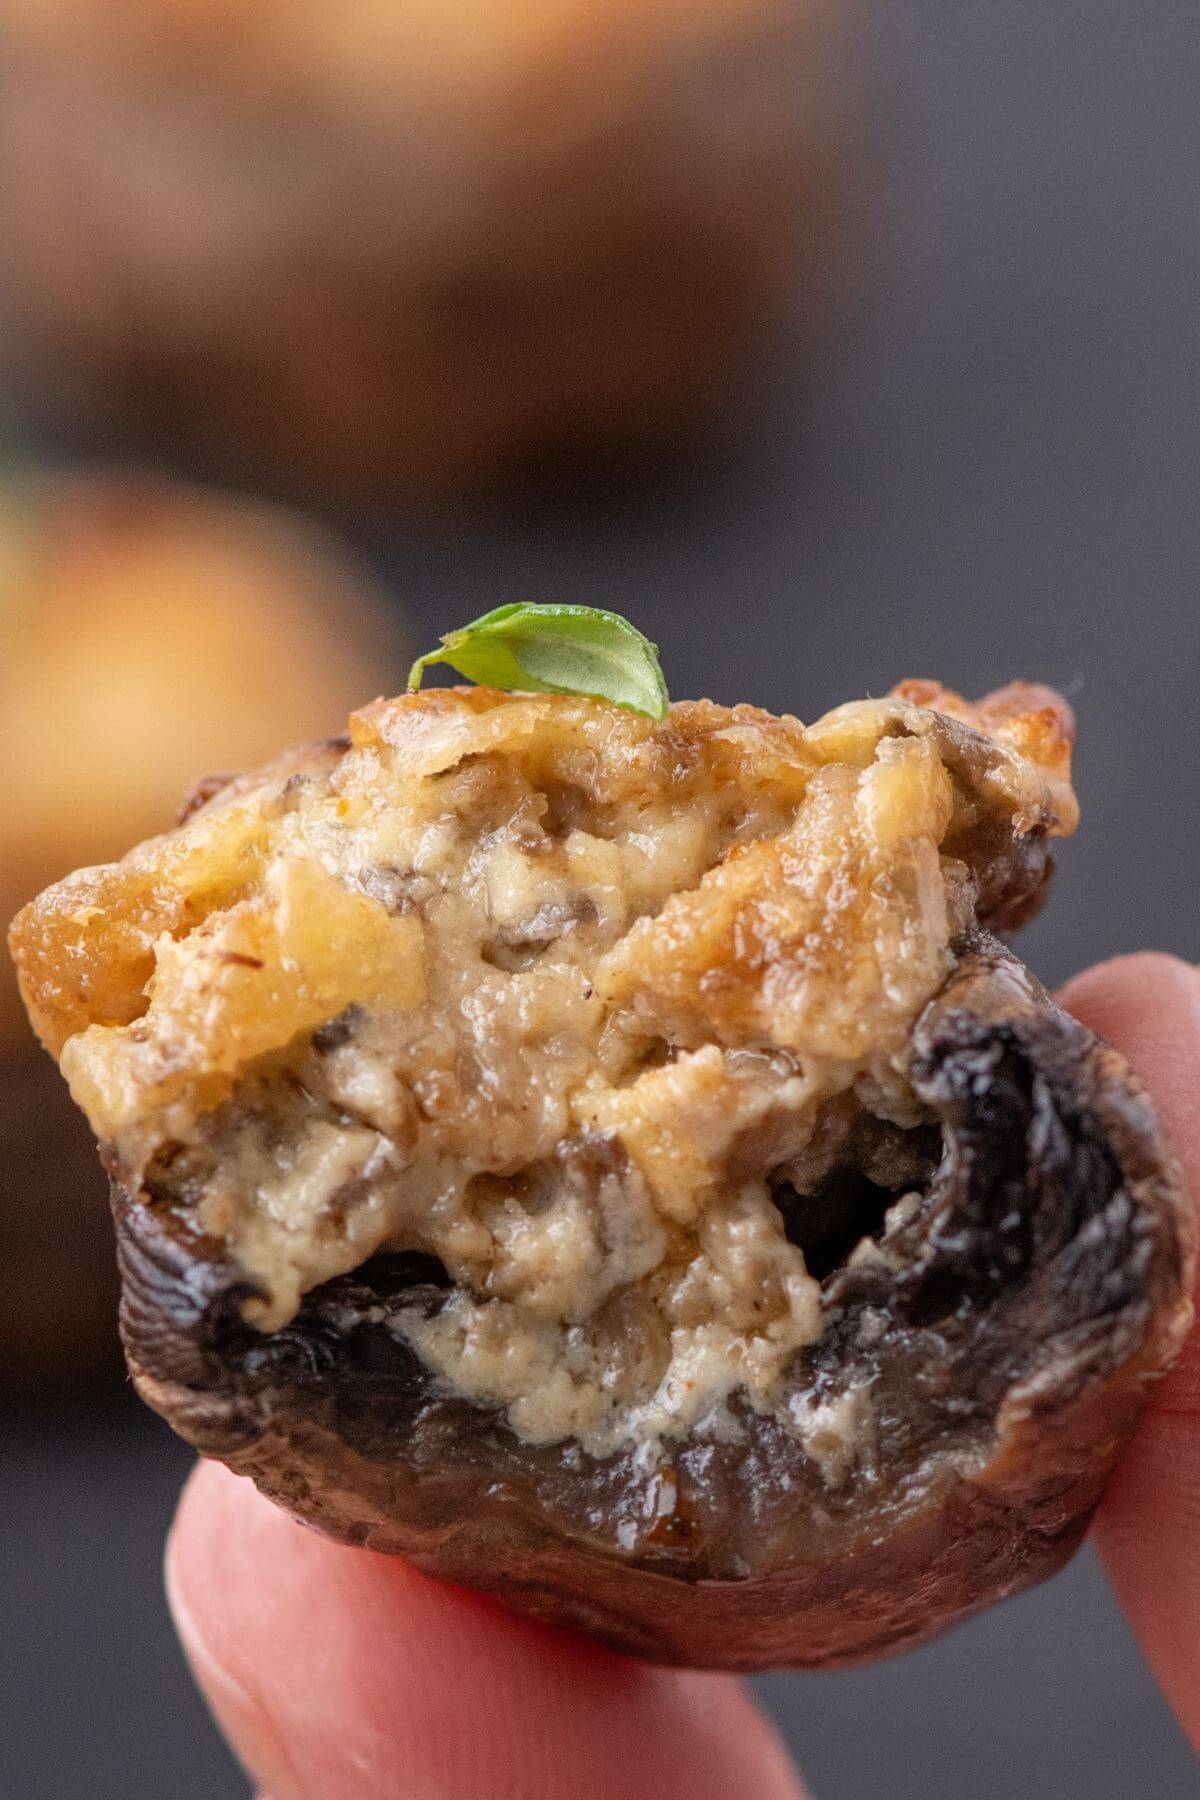 Two fingers hold up a stuffed mushroom close enough to see all the filling.